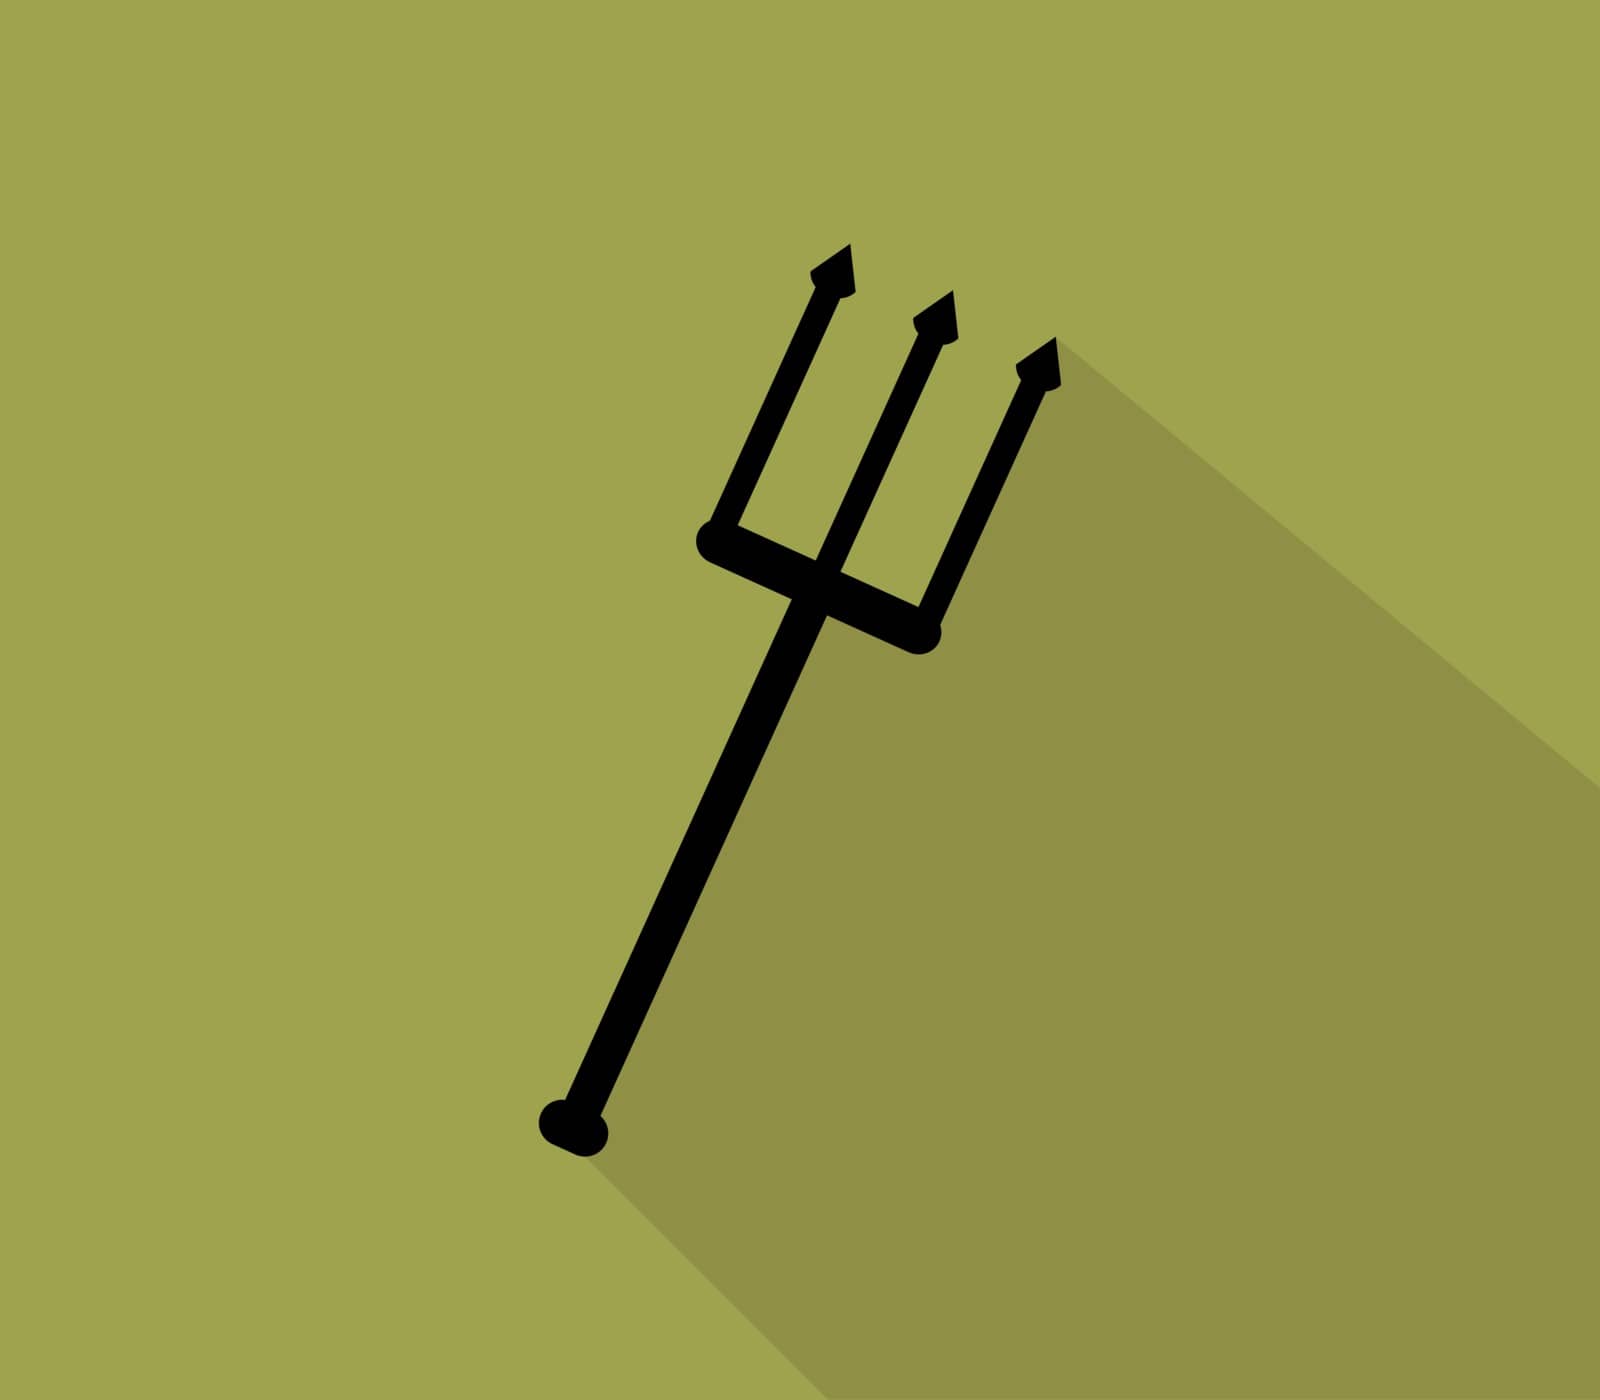 pitchfork icon by Mark1987